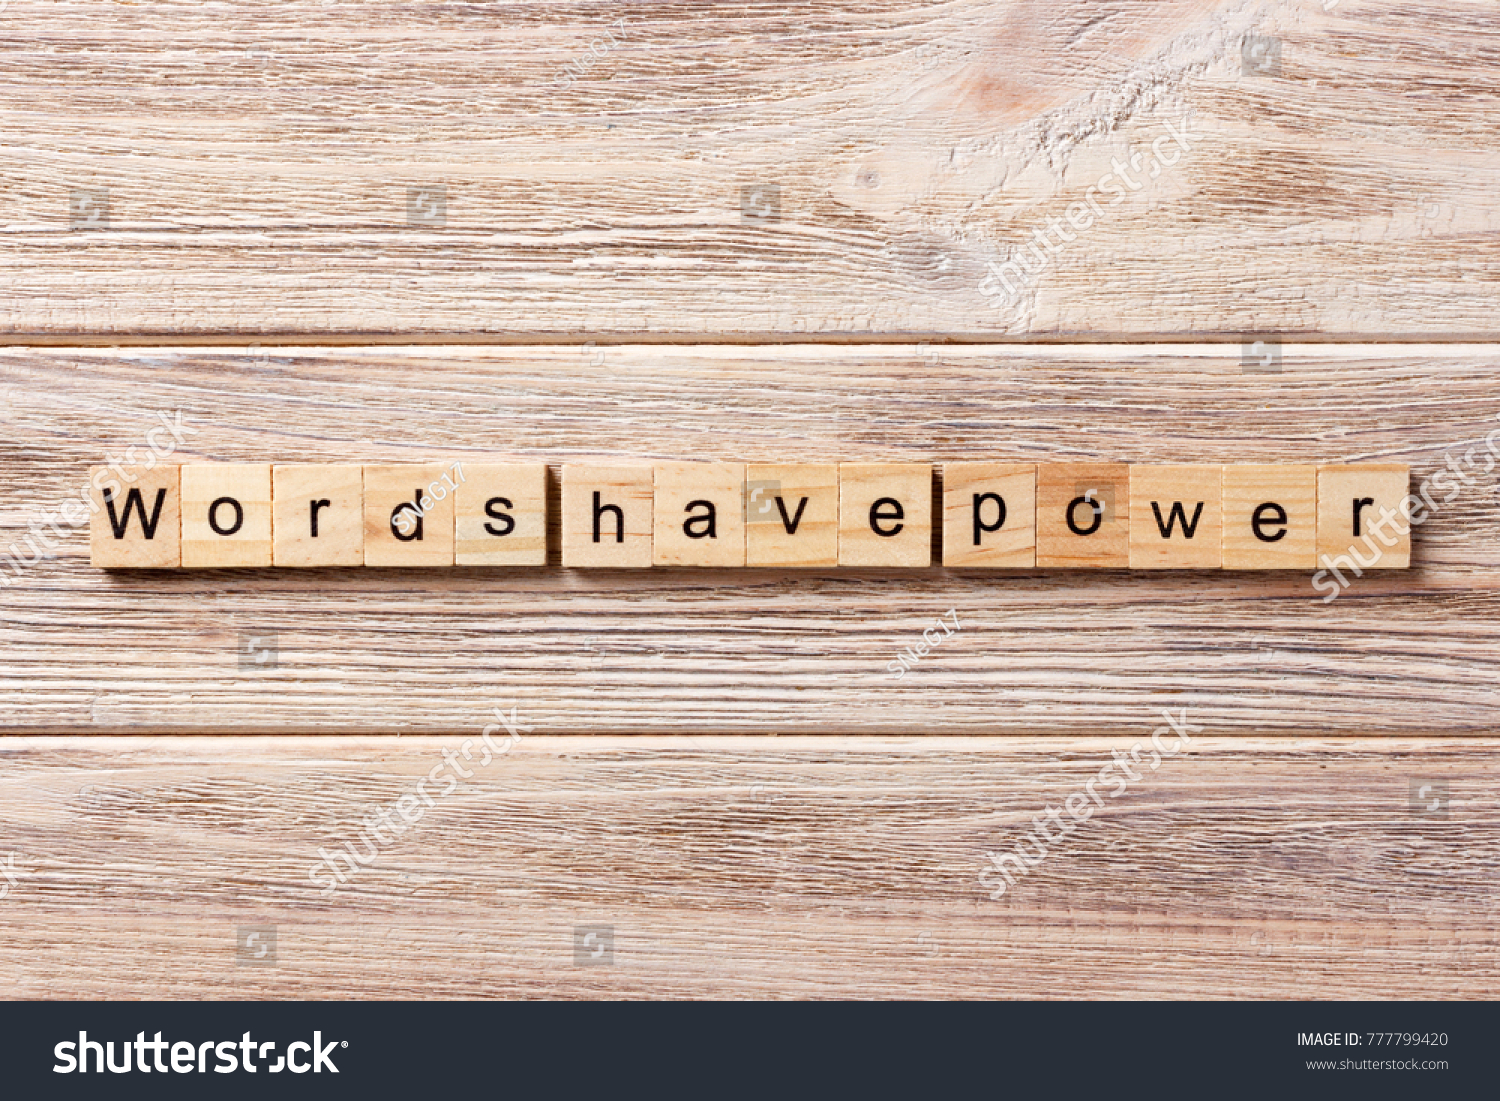 Words have Power word written on wood block. Words have Power text on table, concept. #777799420